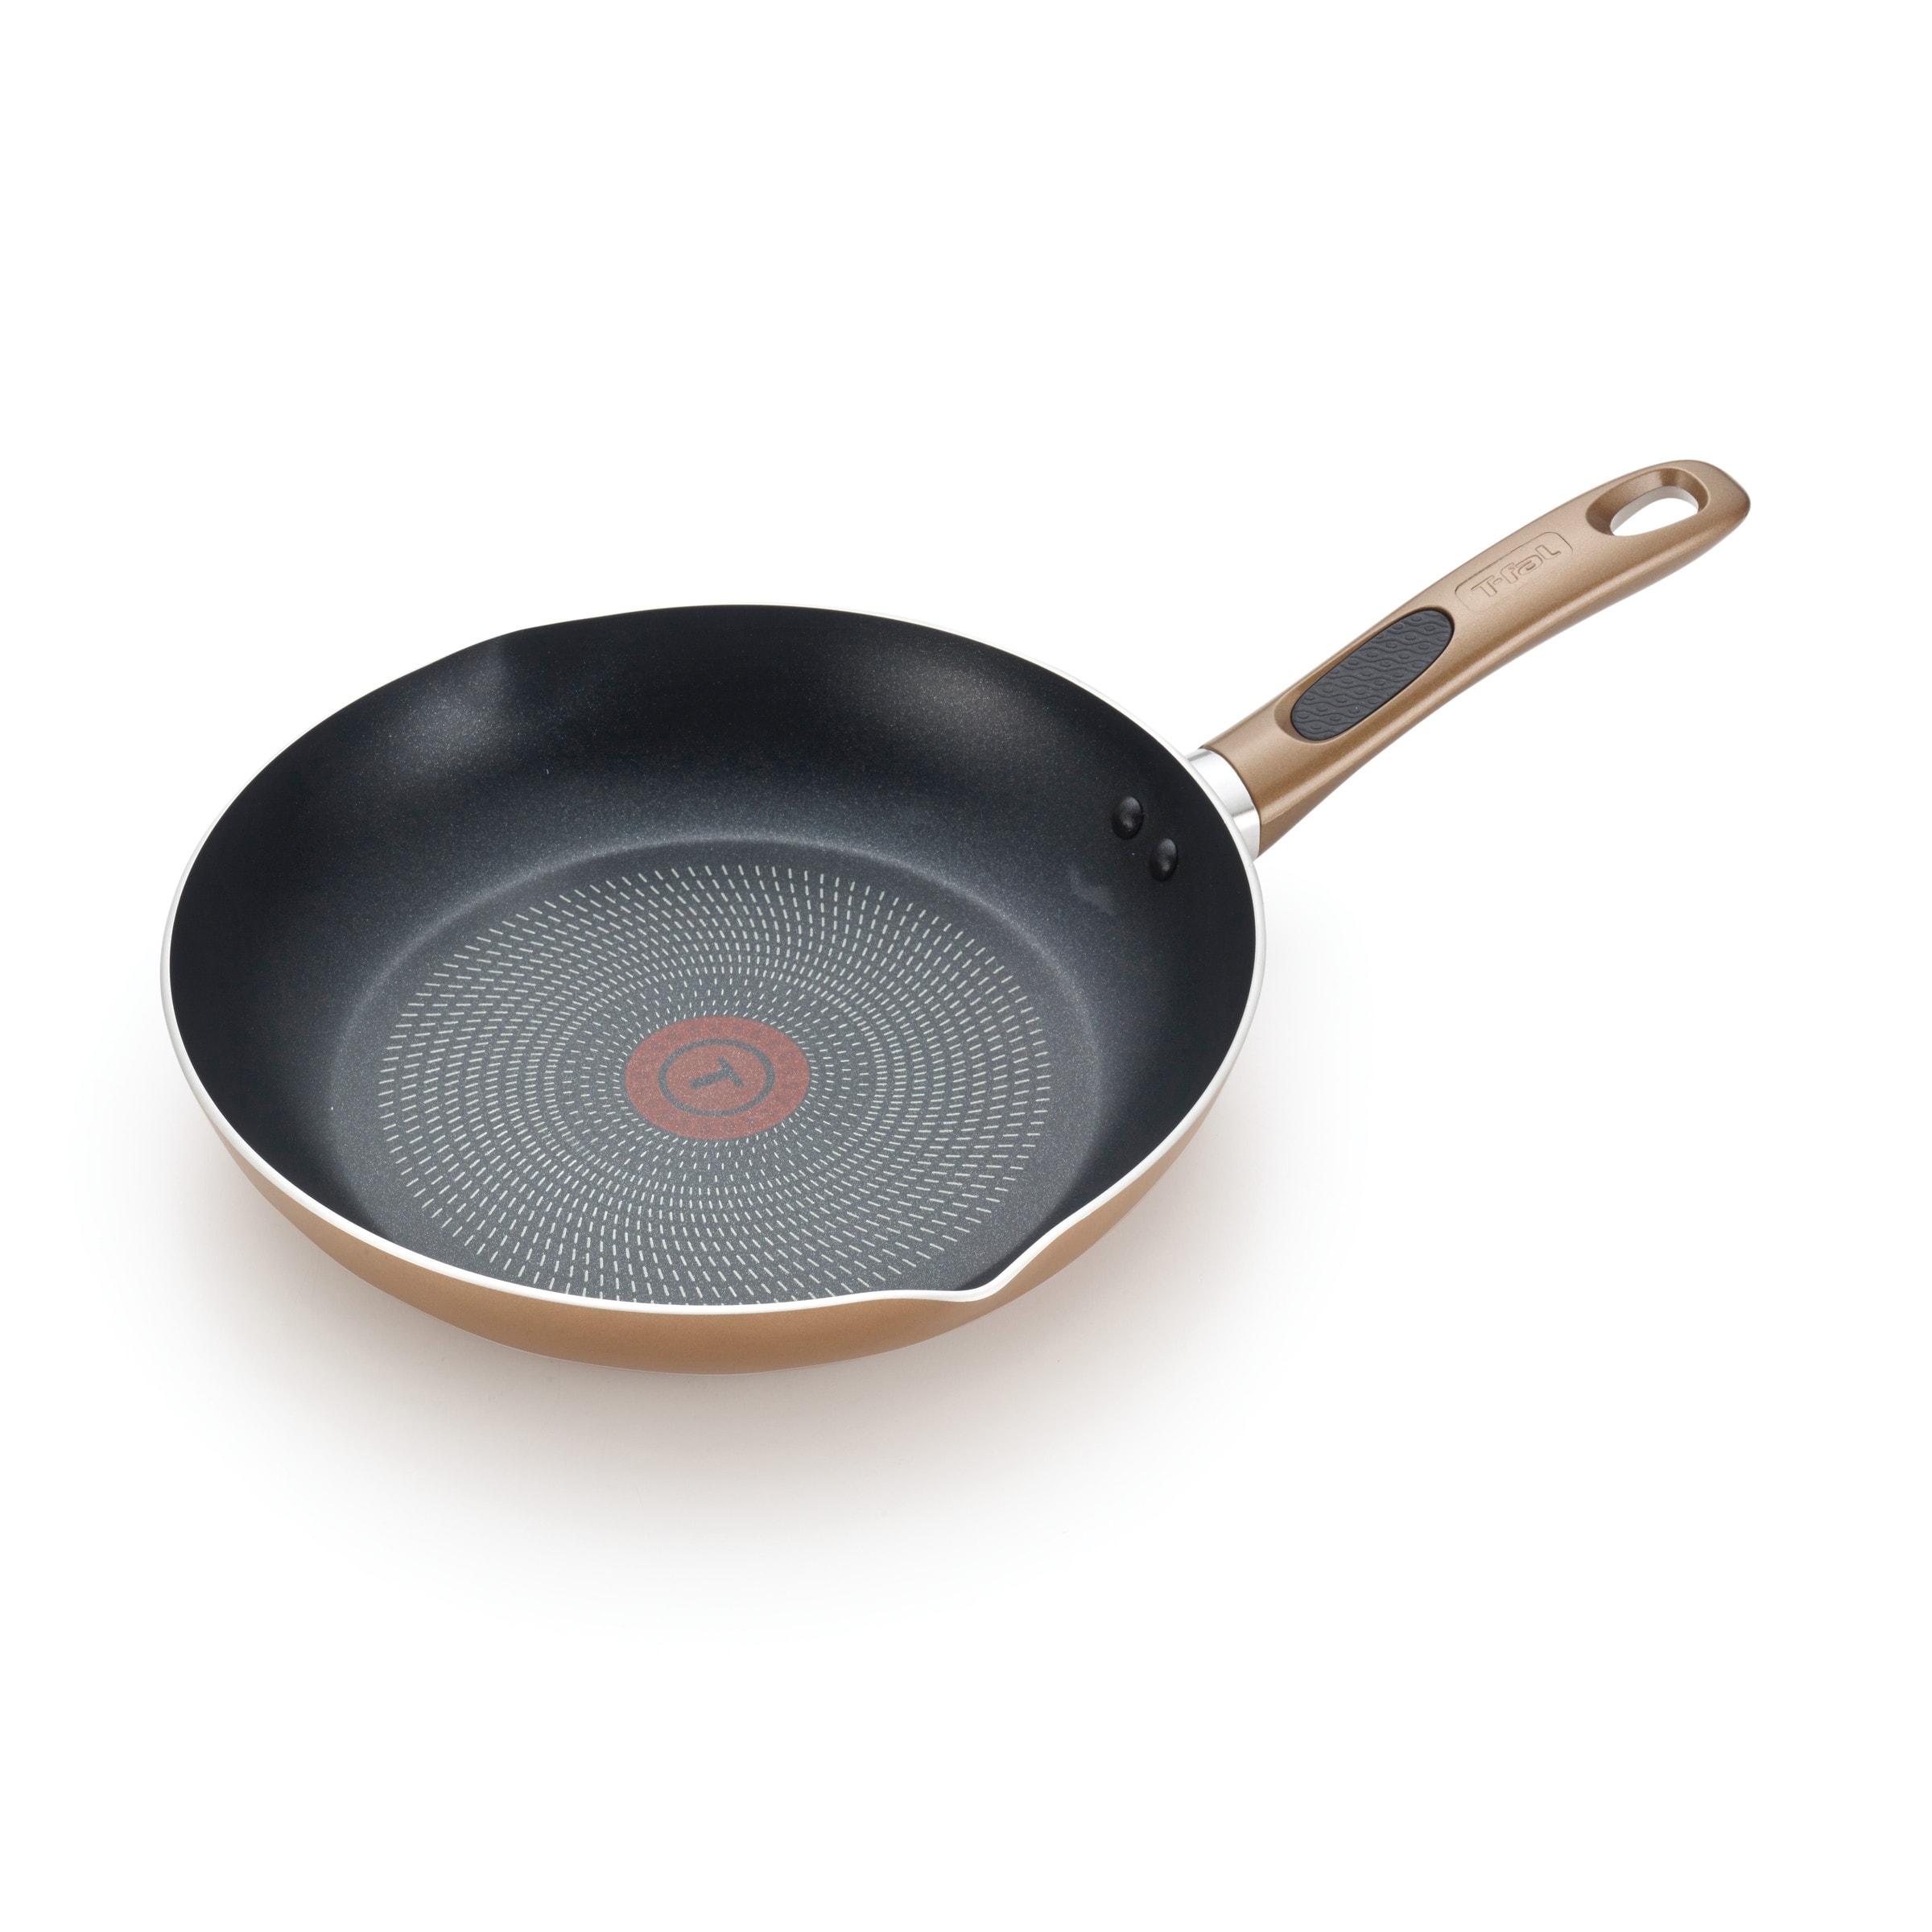 The T-fal Non-Stick Frying Pan Is on Sale at